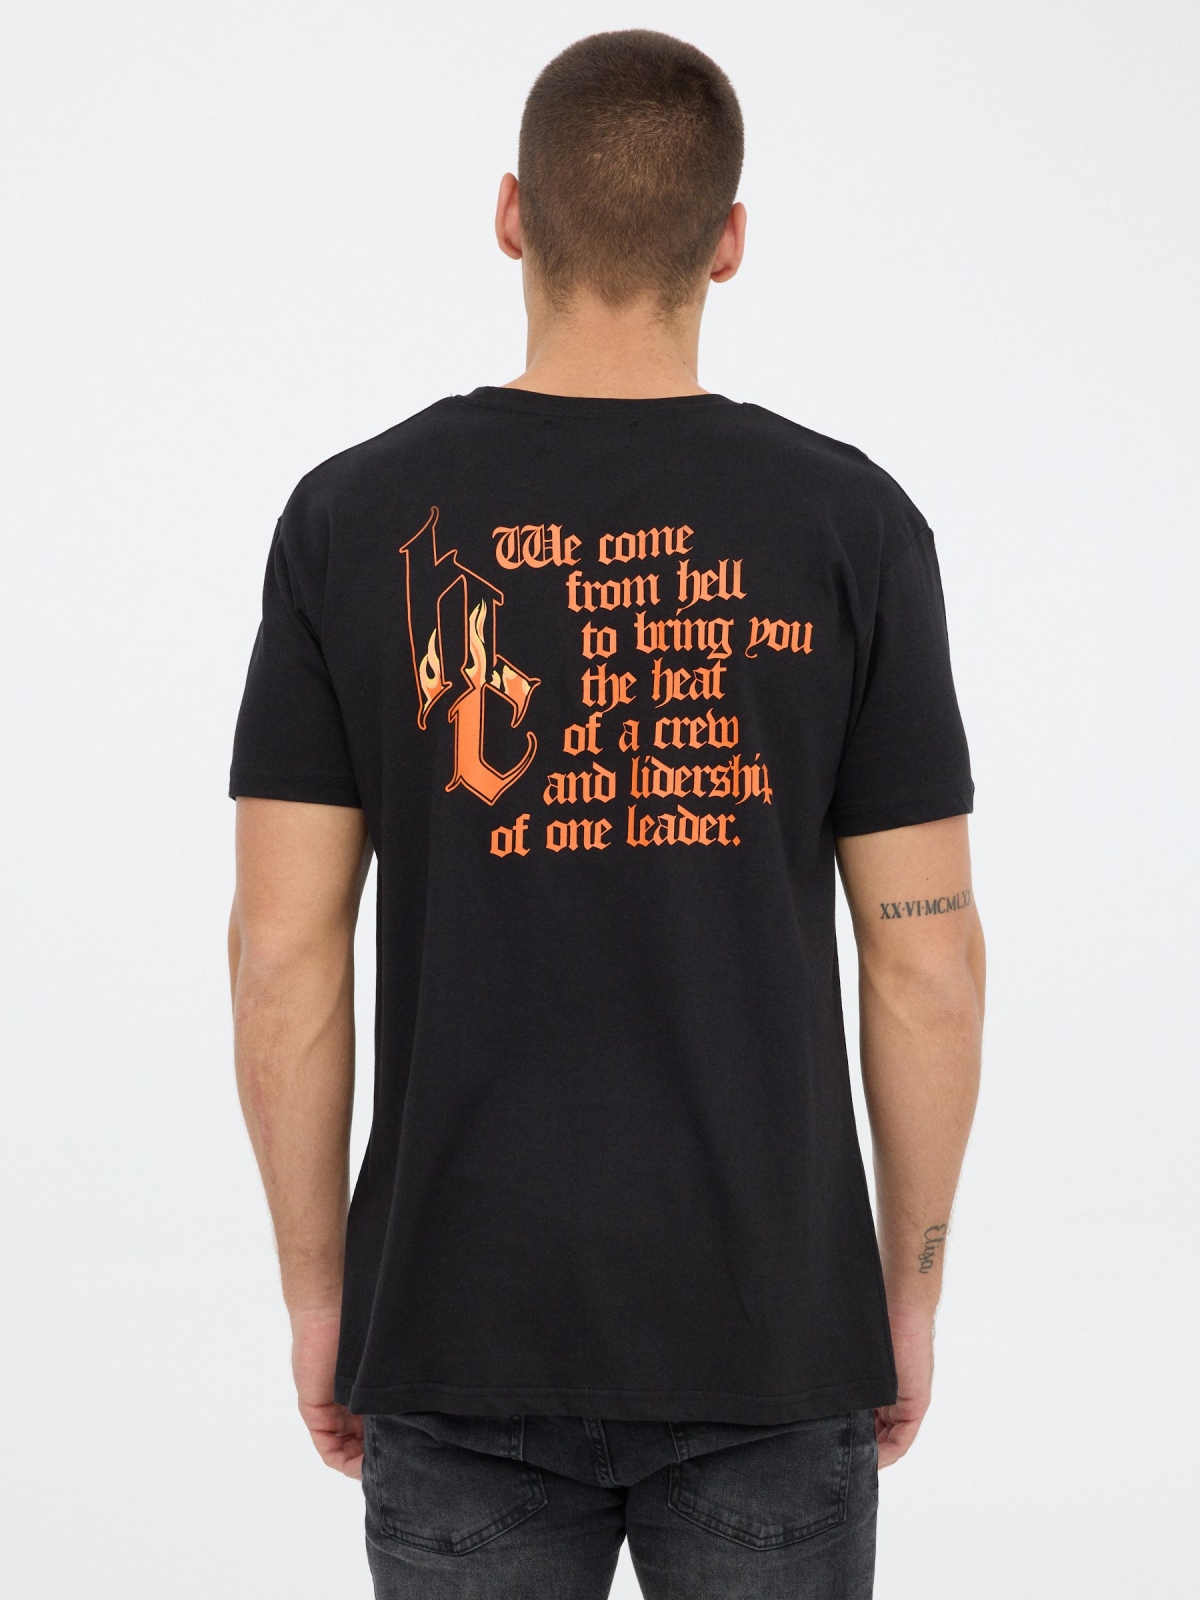 Hell T-shirt black middle back view